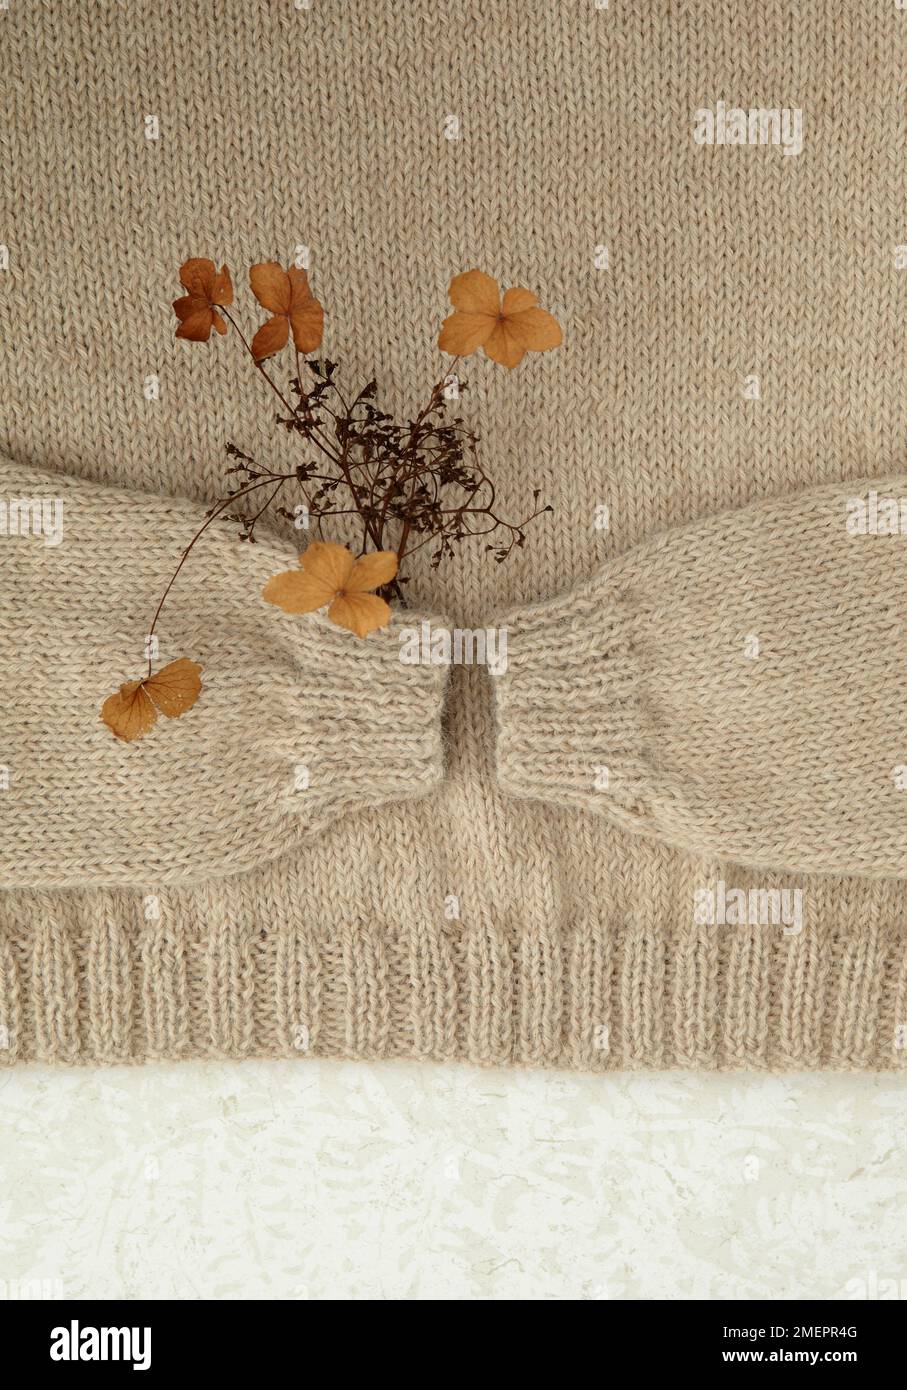 Beige alpaca sweater with flowers tucked under one of the sleeves Stock Photo